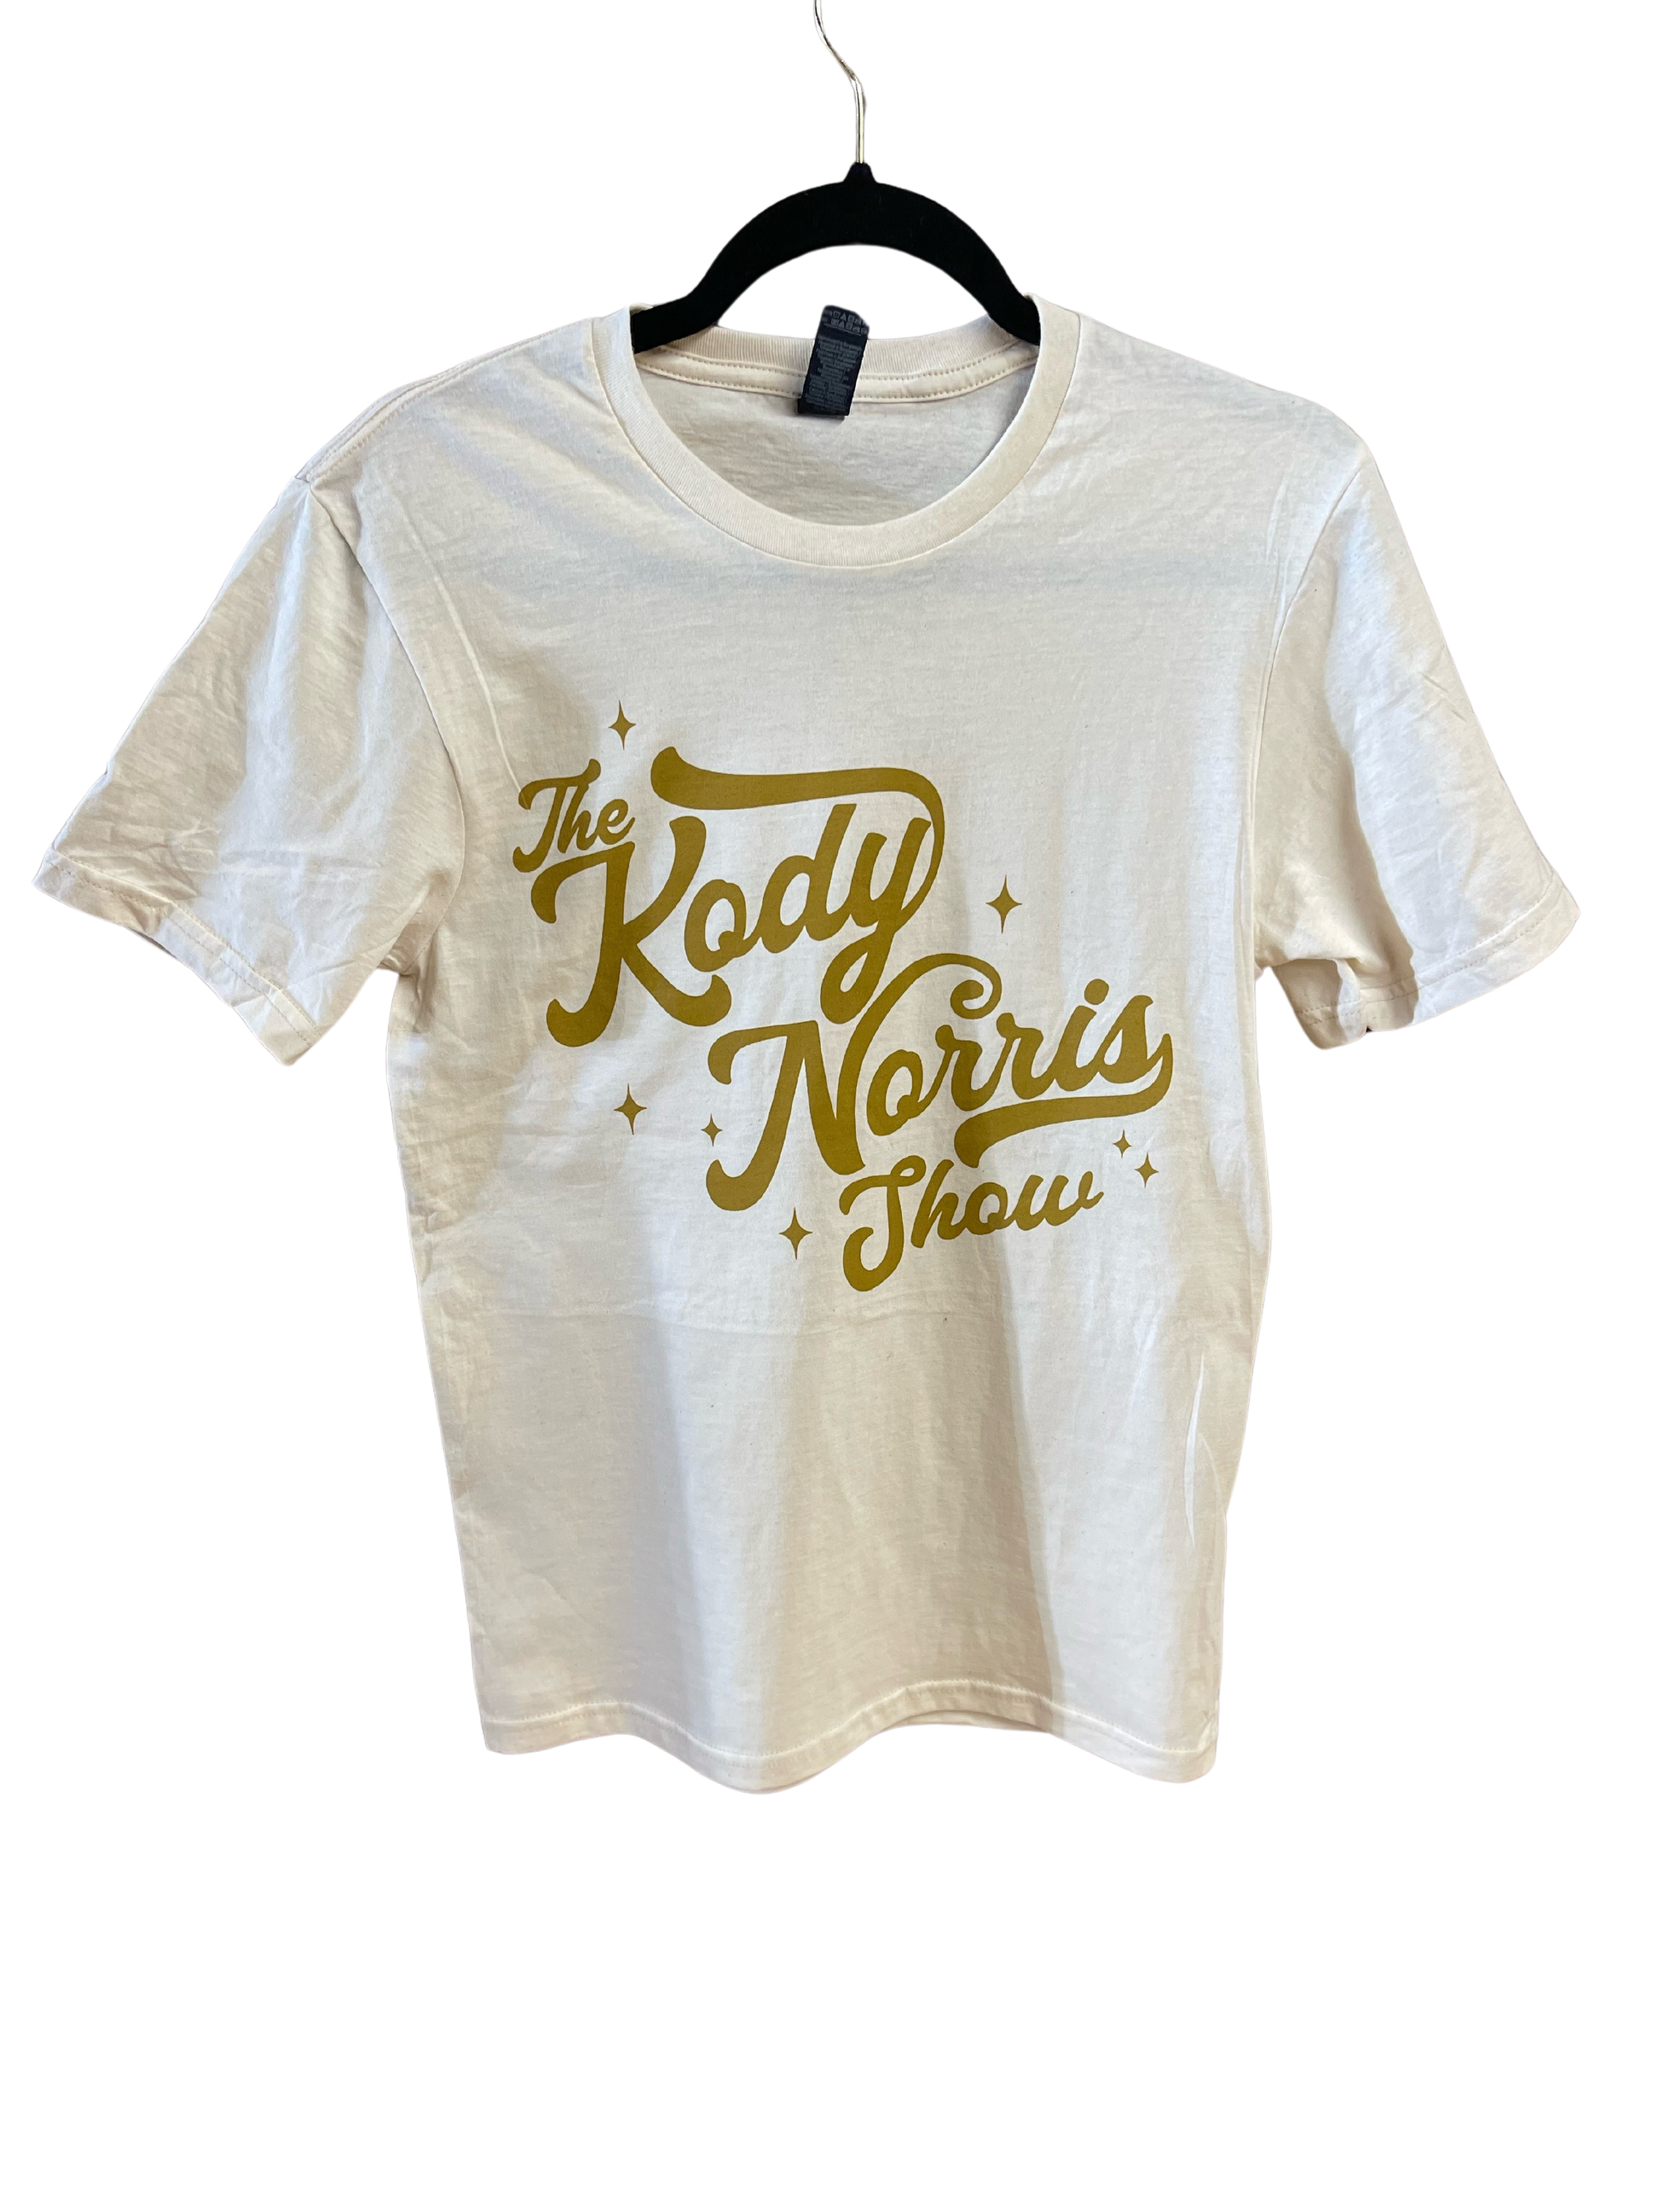 The Kody Norris Show Graphic Tee (Short Sleeve, Color Natural) Gildan Softstyle Tee.   Available in Natural with Gold Lettering   All Shirts include a secondary logo on the back collar.